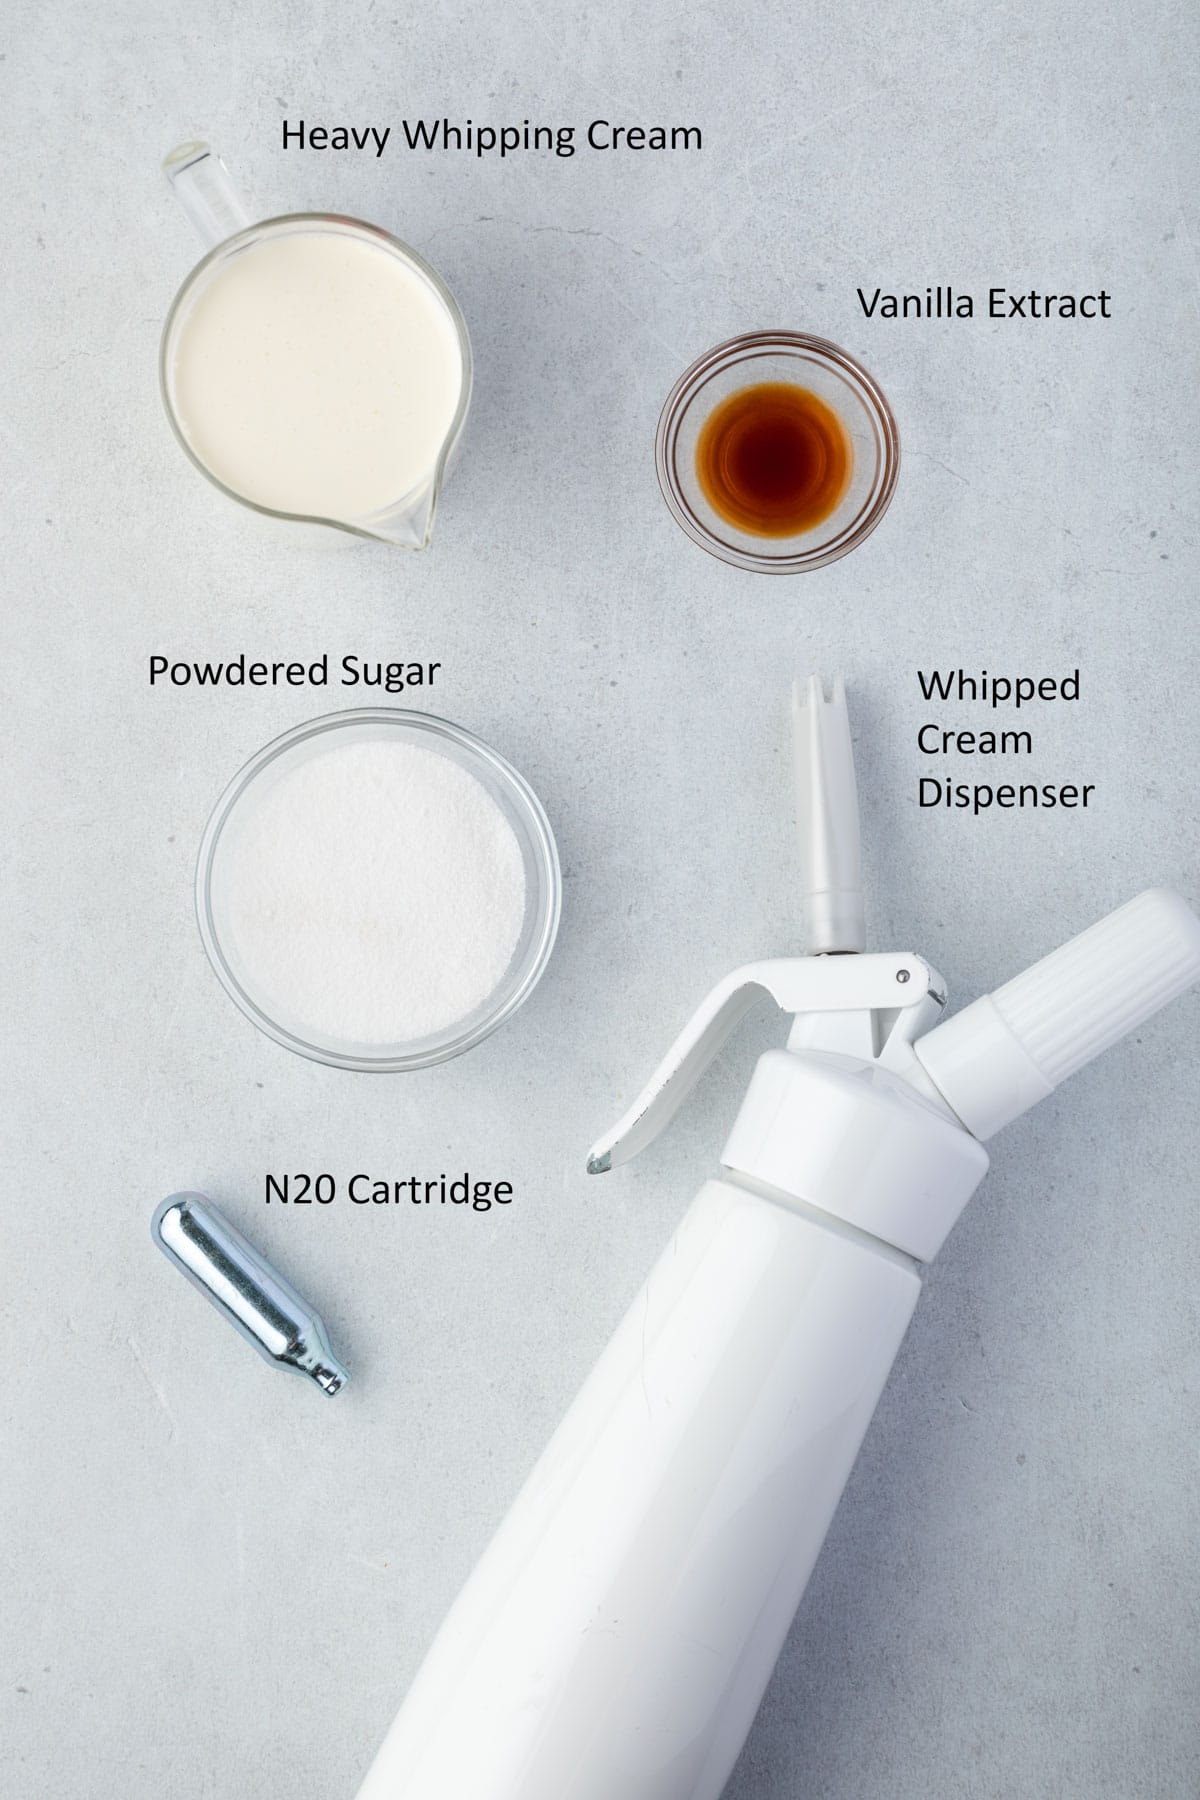 Ingredients and equipment needed for whipped cream dispenser recipe.